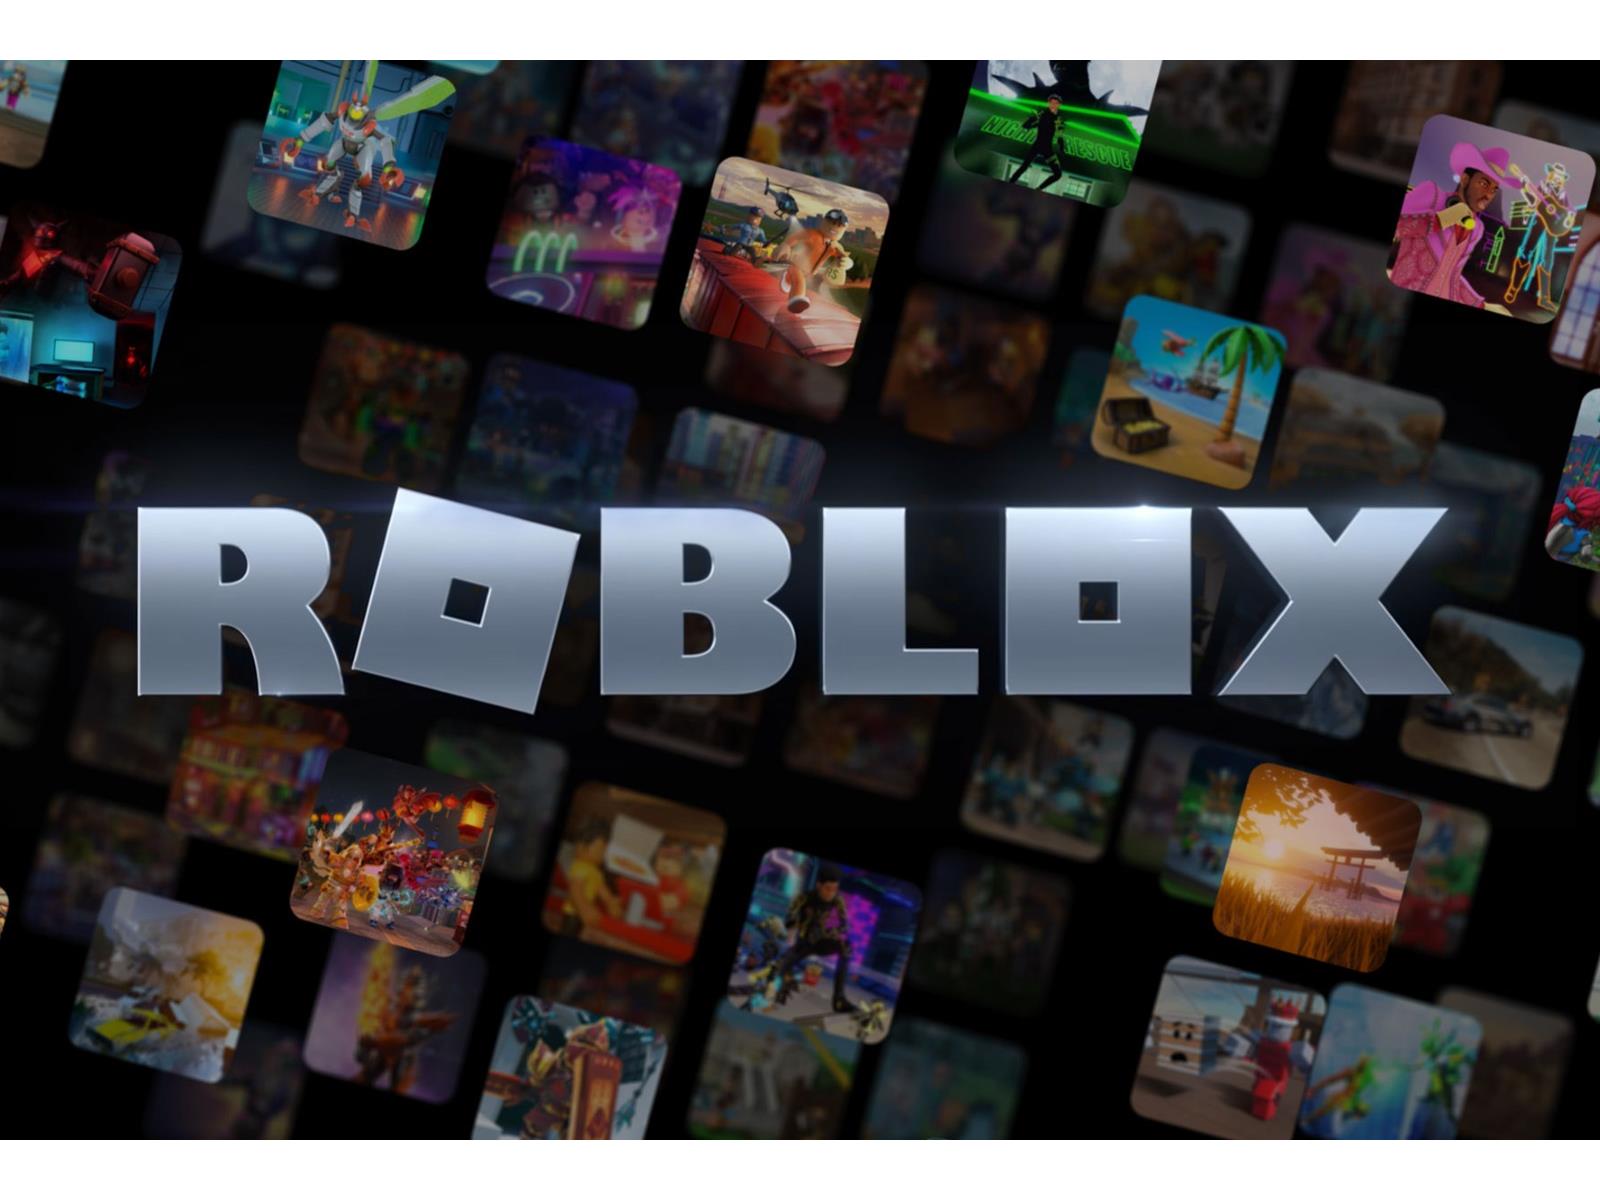 Roblox Outage Sparks Usage Rise in Rival Mobile Games Minecraft and Among Us